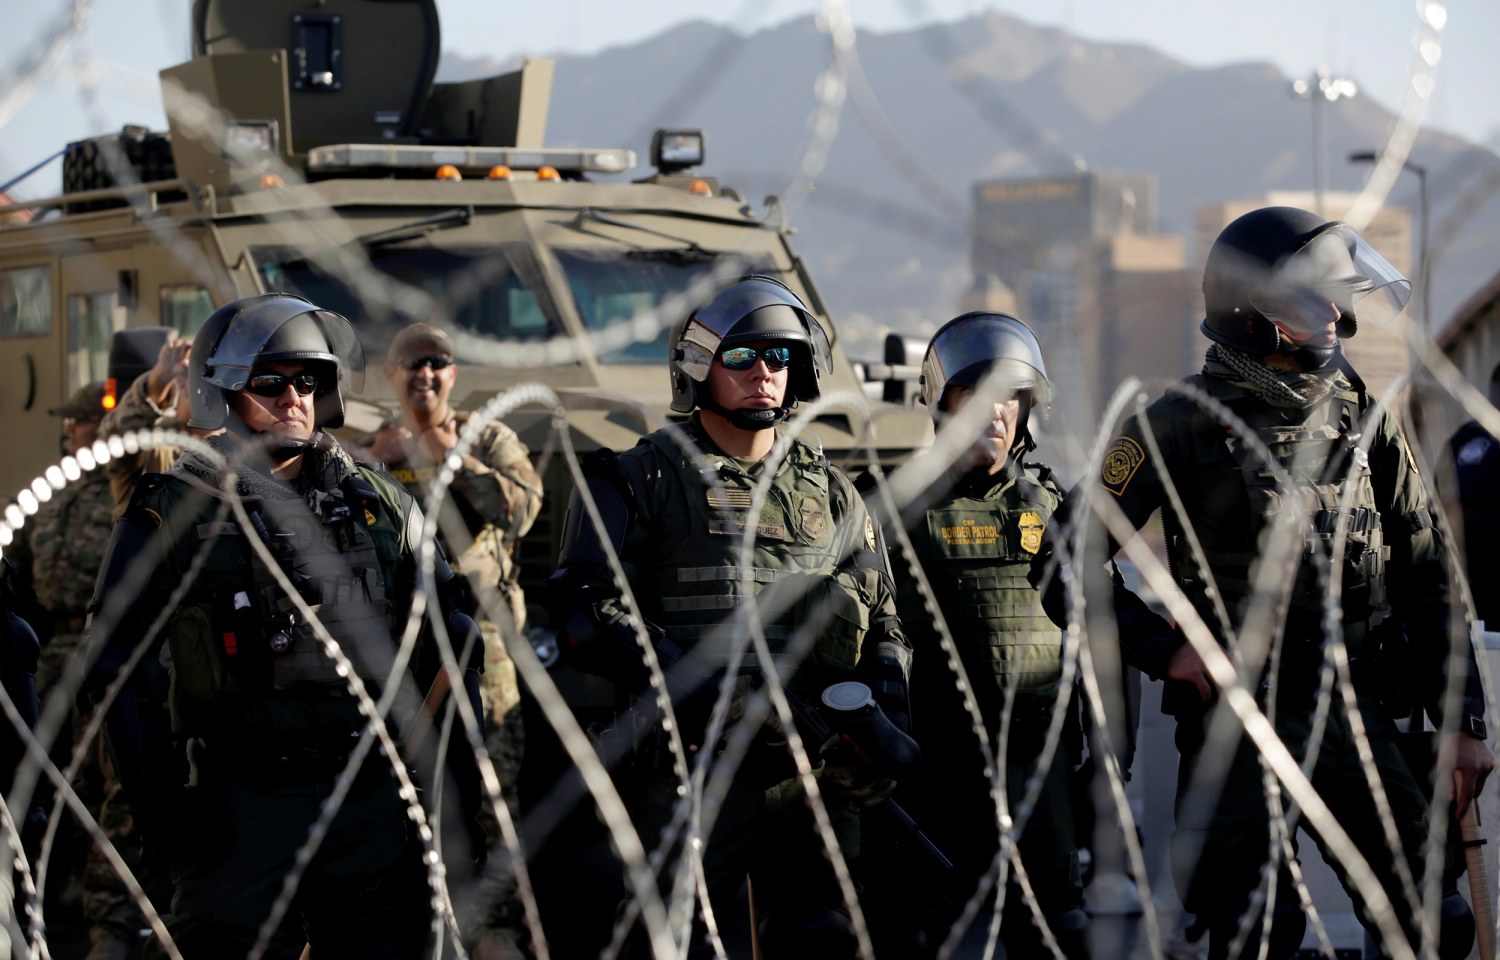 Border Patrol Creates New Position to Support Frontline Agents